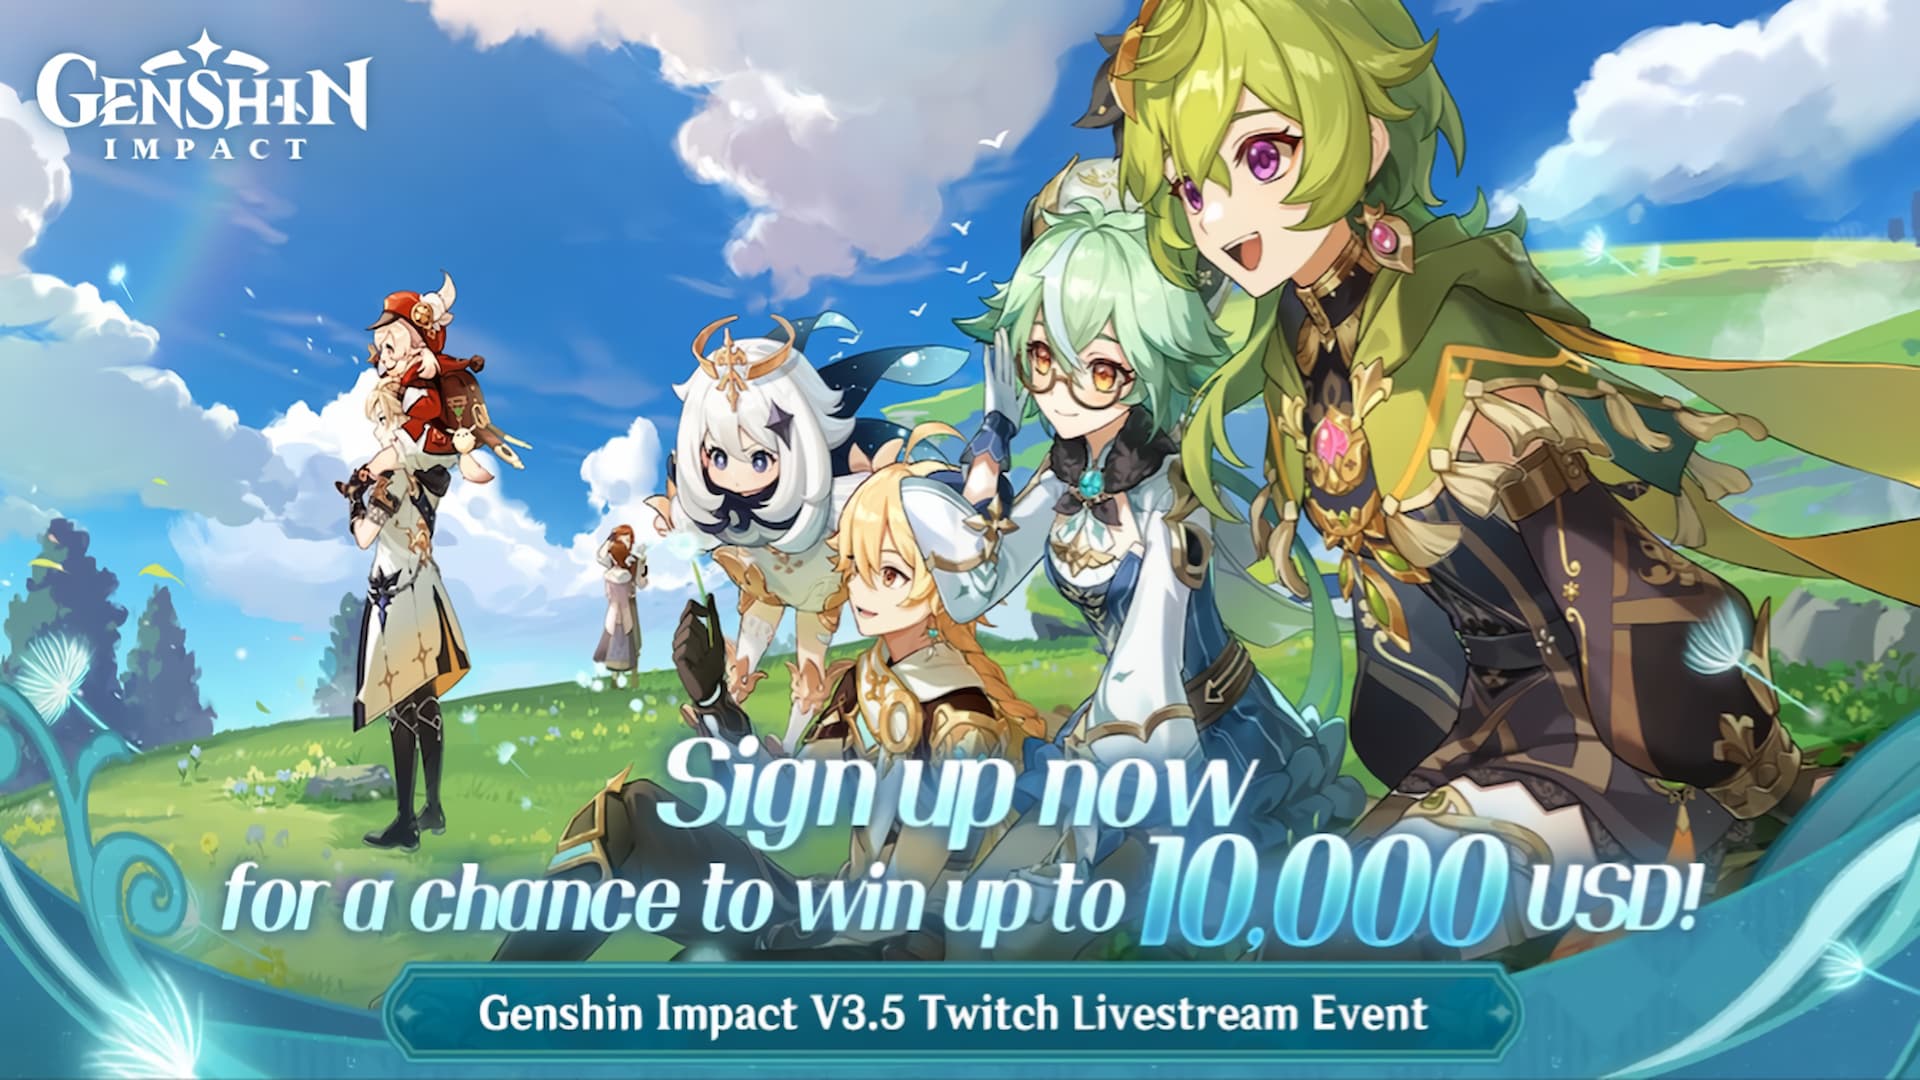 Stream Genshin Impact 3.5 on Twitch to earn Primogems in new event: anime characters sitting on a hill behind descriptive text for a genshin impact event